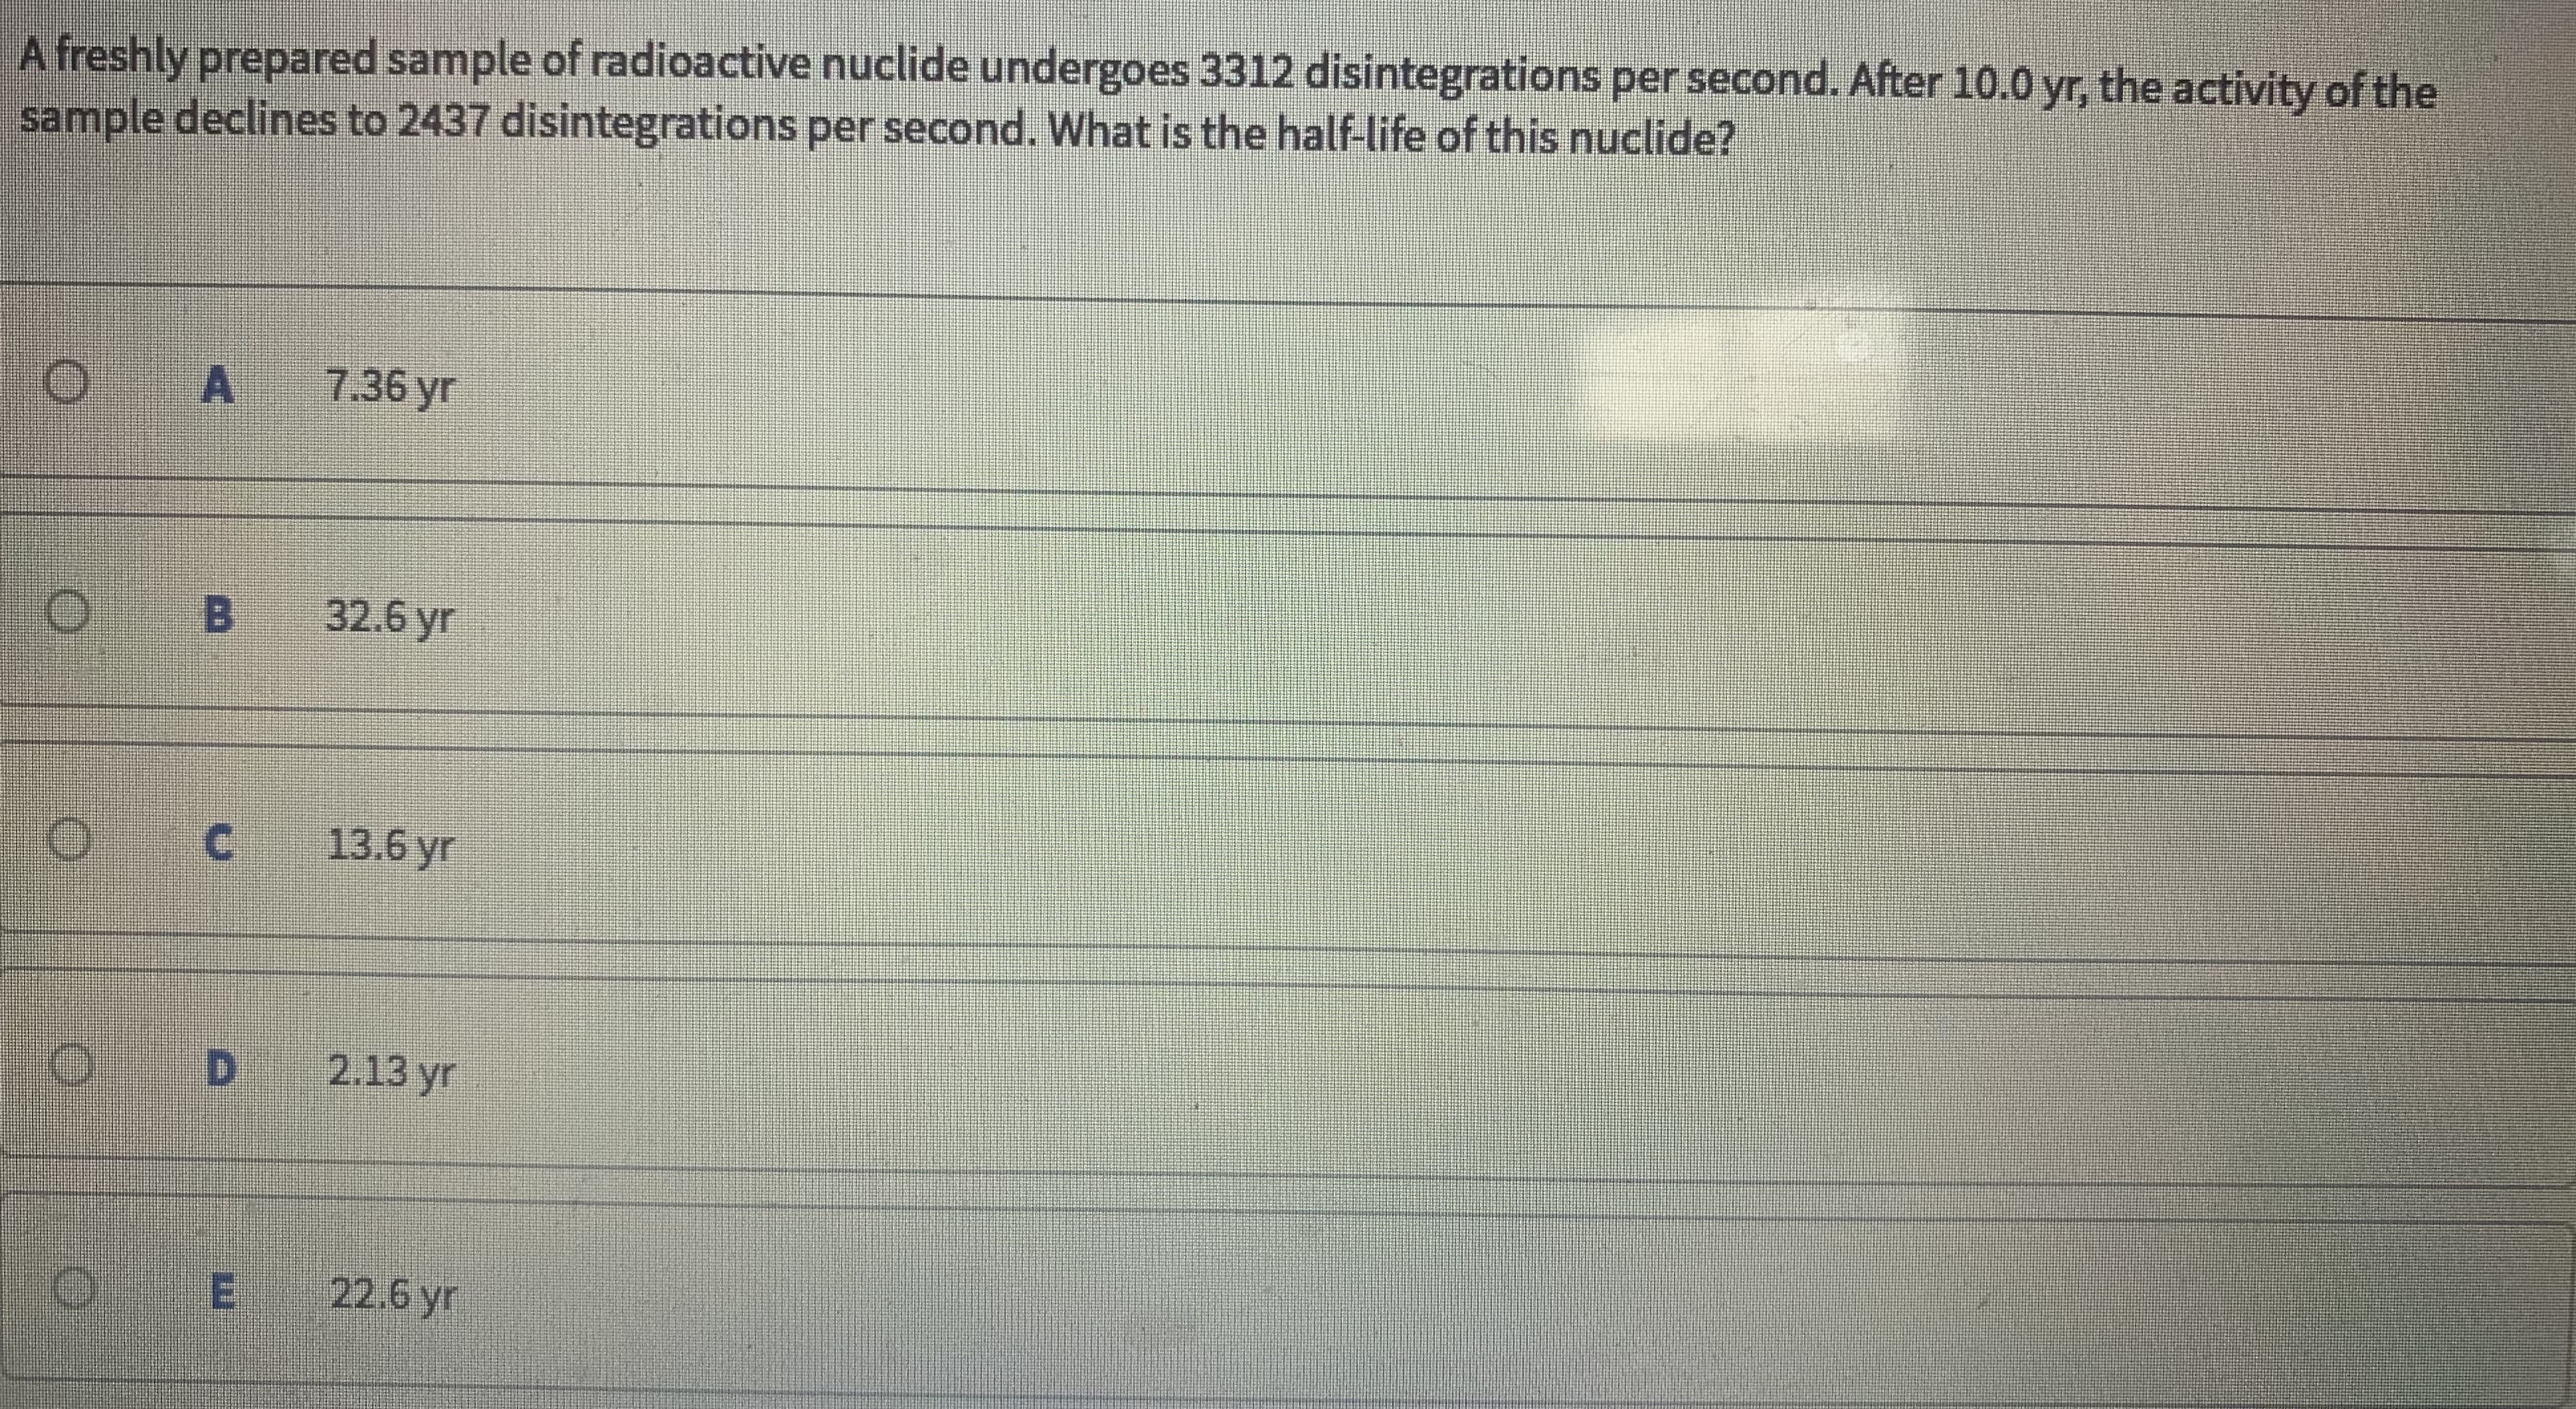 A freshly prepared sample of radioactive nuclide undergoes 3312 disintegrations per second. After 10.0 yr, the activity of the
sample declines to 2437 disintegrations per second. What is the half-life of this nuclide?
